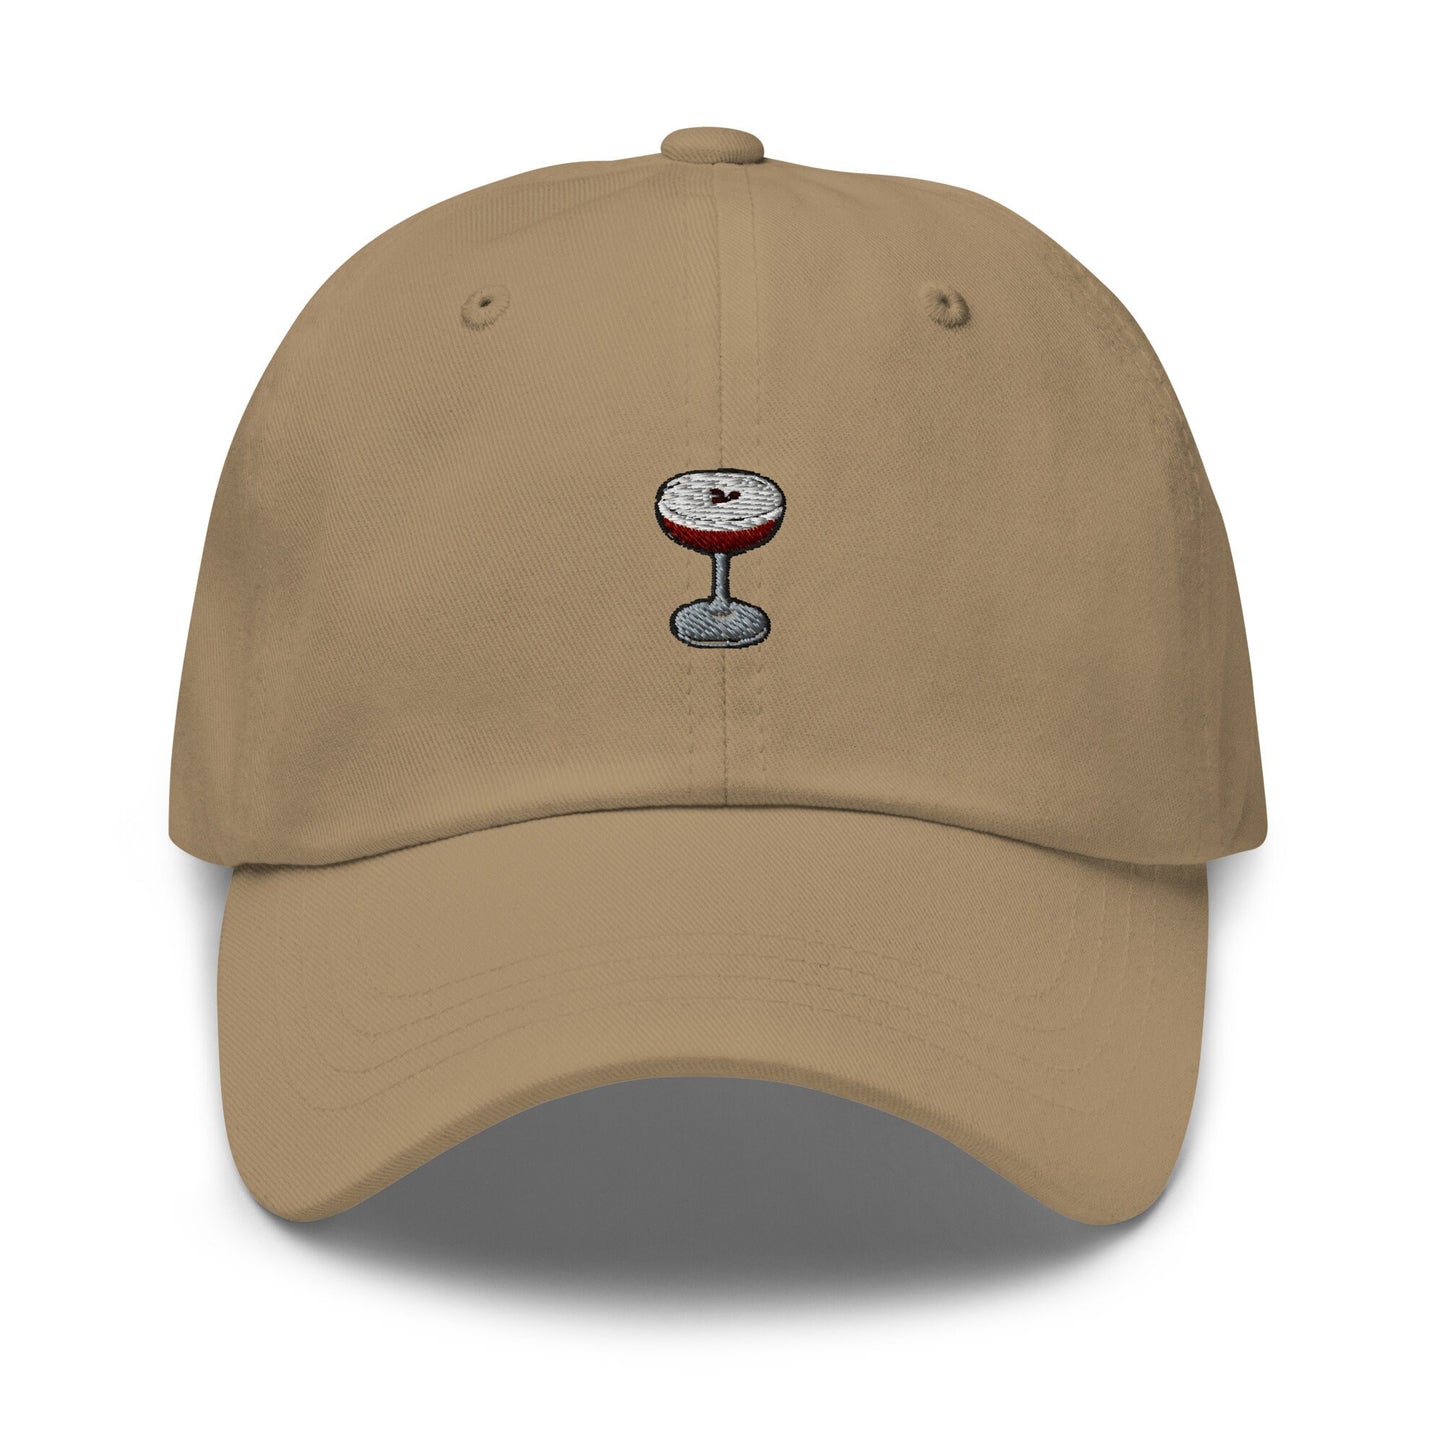 Embroidered Espresso Martini Hat - Gift for Cocktail Lovers - Minimalist Cap - Multiple Colours